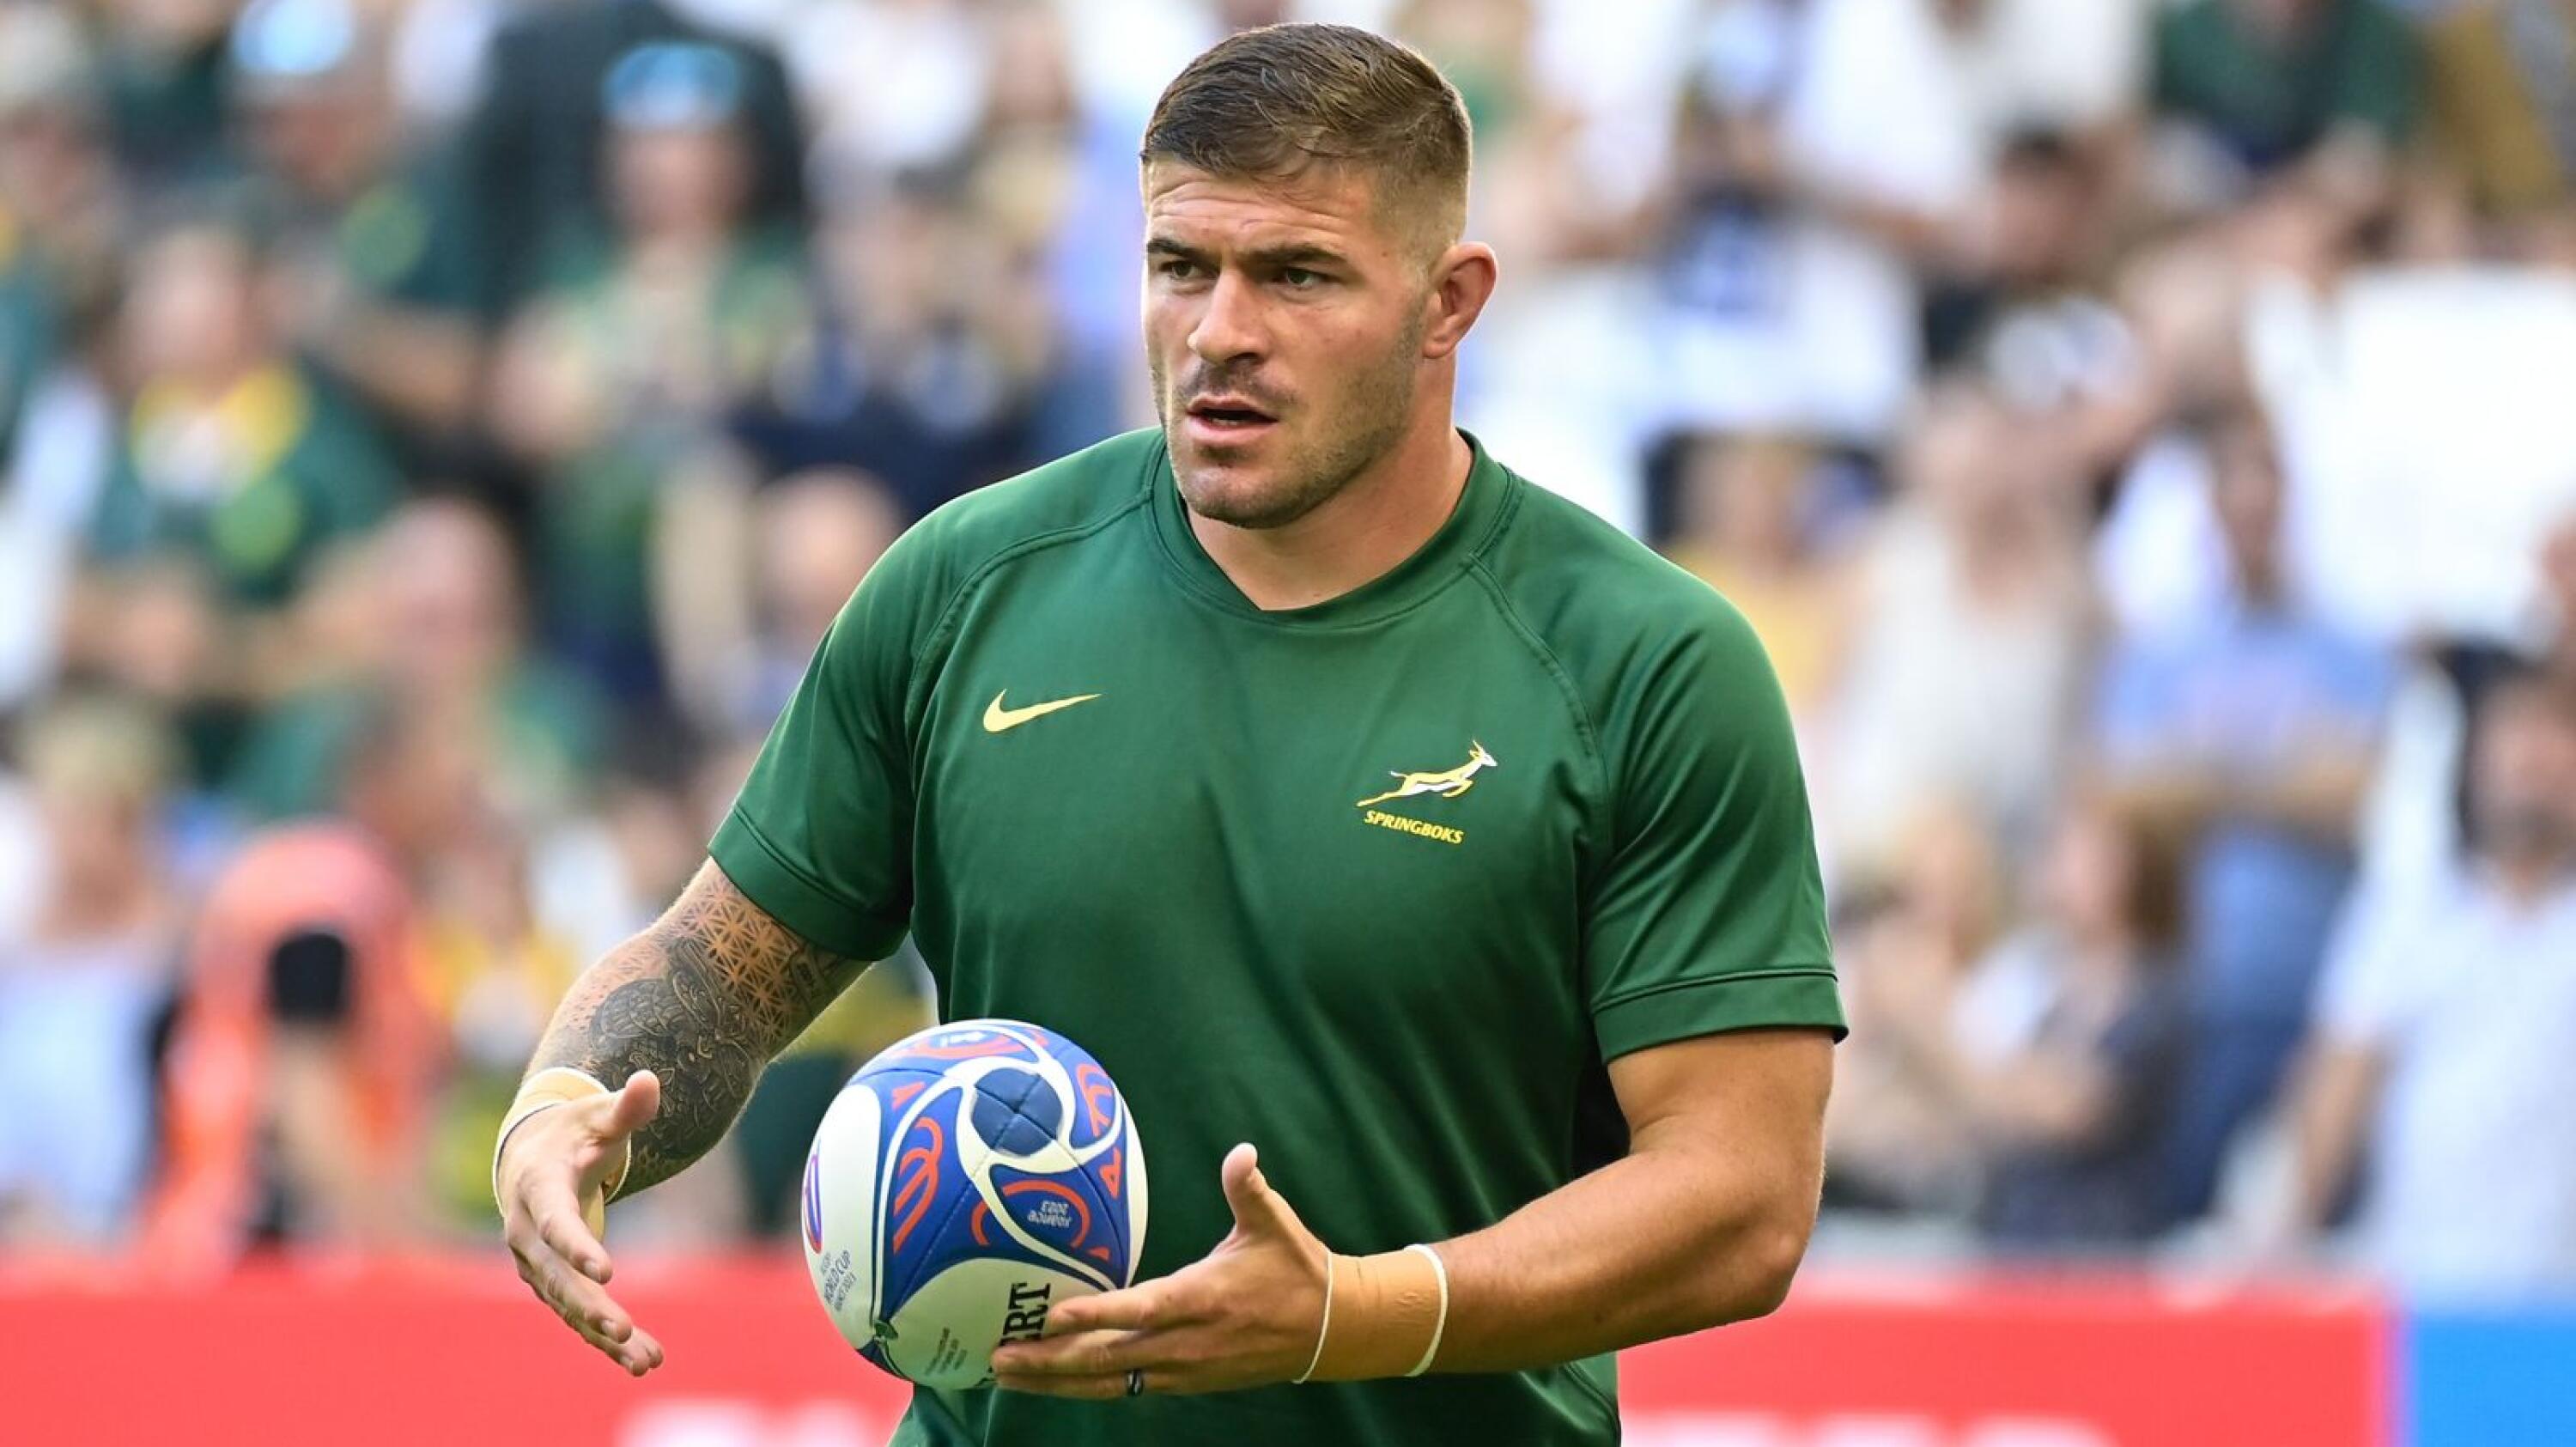 Springboks hooker Malcolm Marx warms up ahead of the Rugby World Cup match against Scotland.